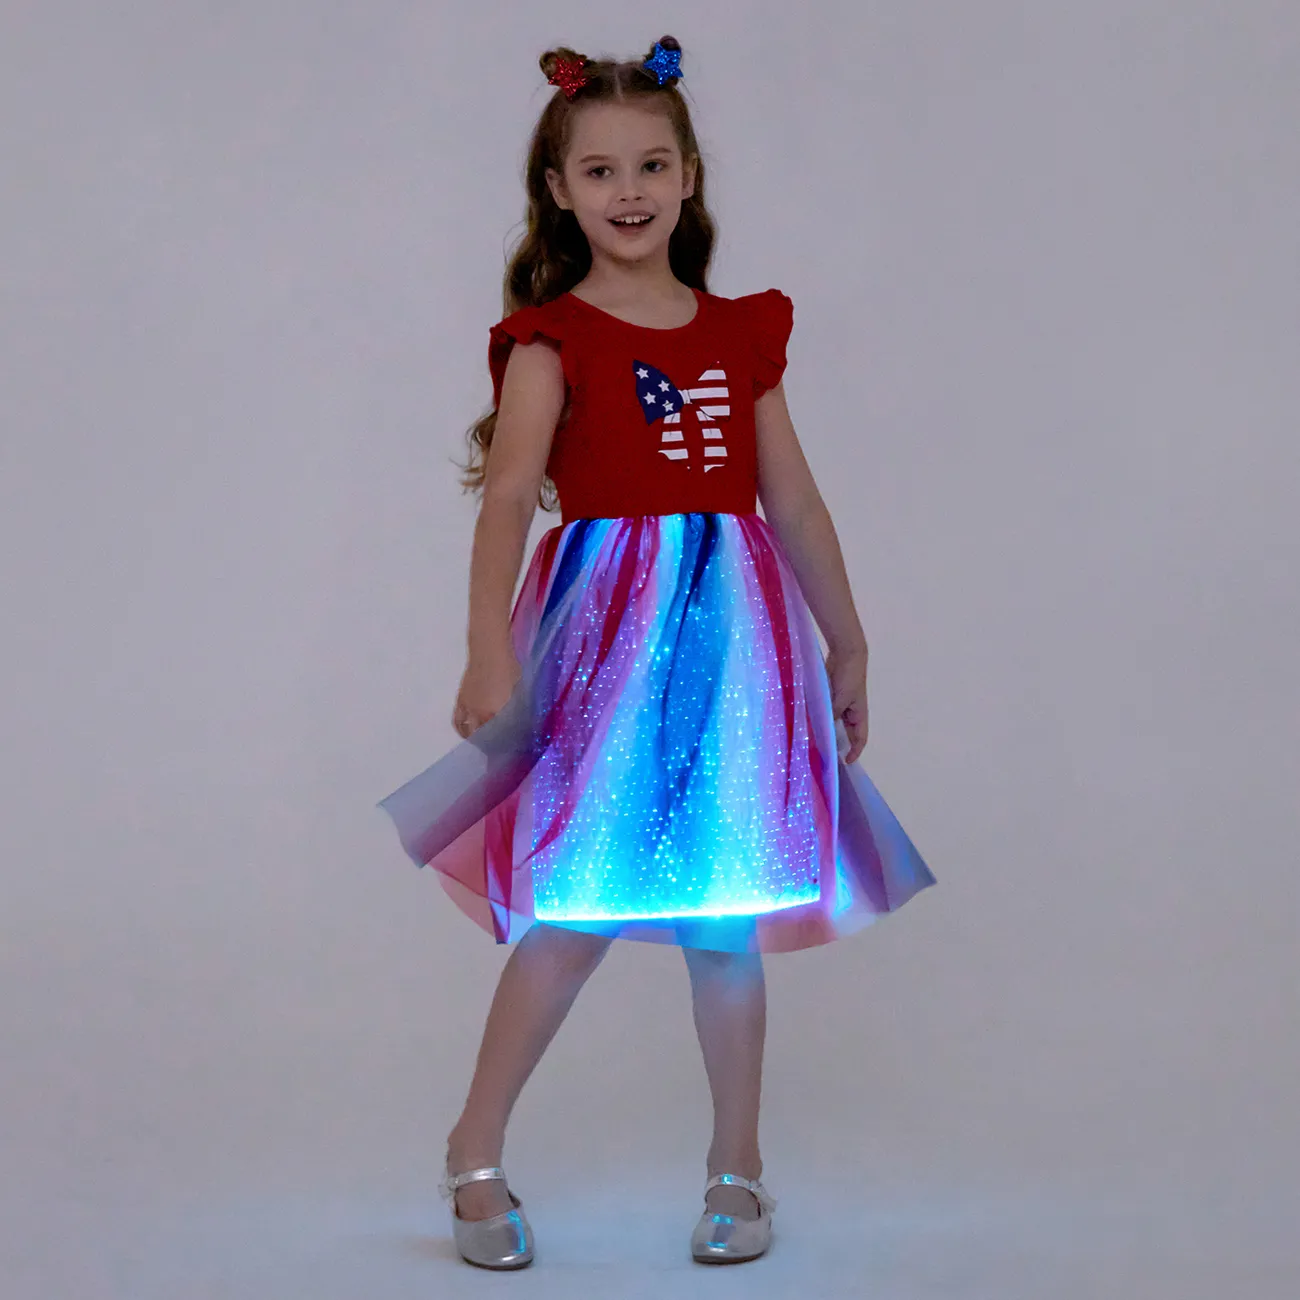 Go-Glow Illuminating Bow-knot Dress with Light Up Skirt Including Controller (Battery Inside) Red big image 1